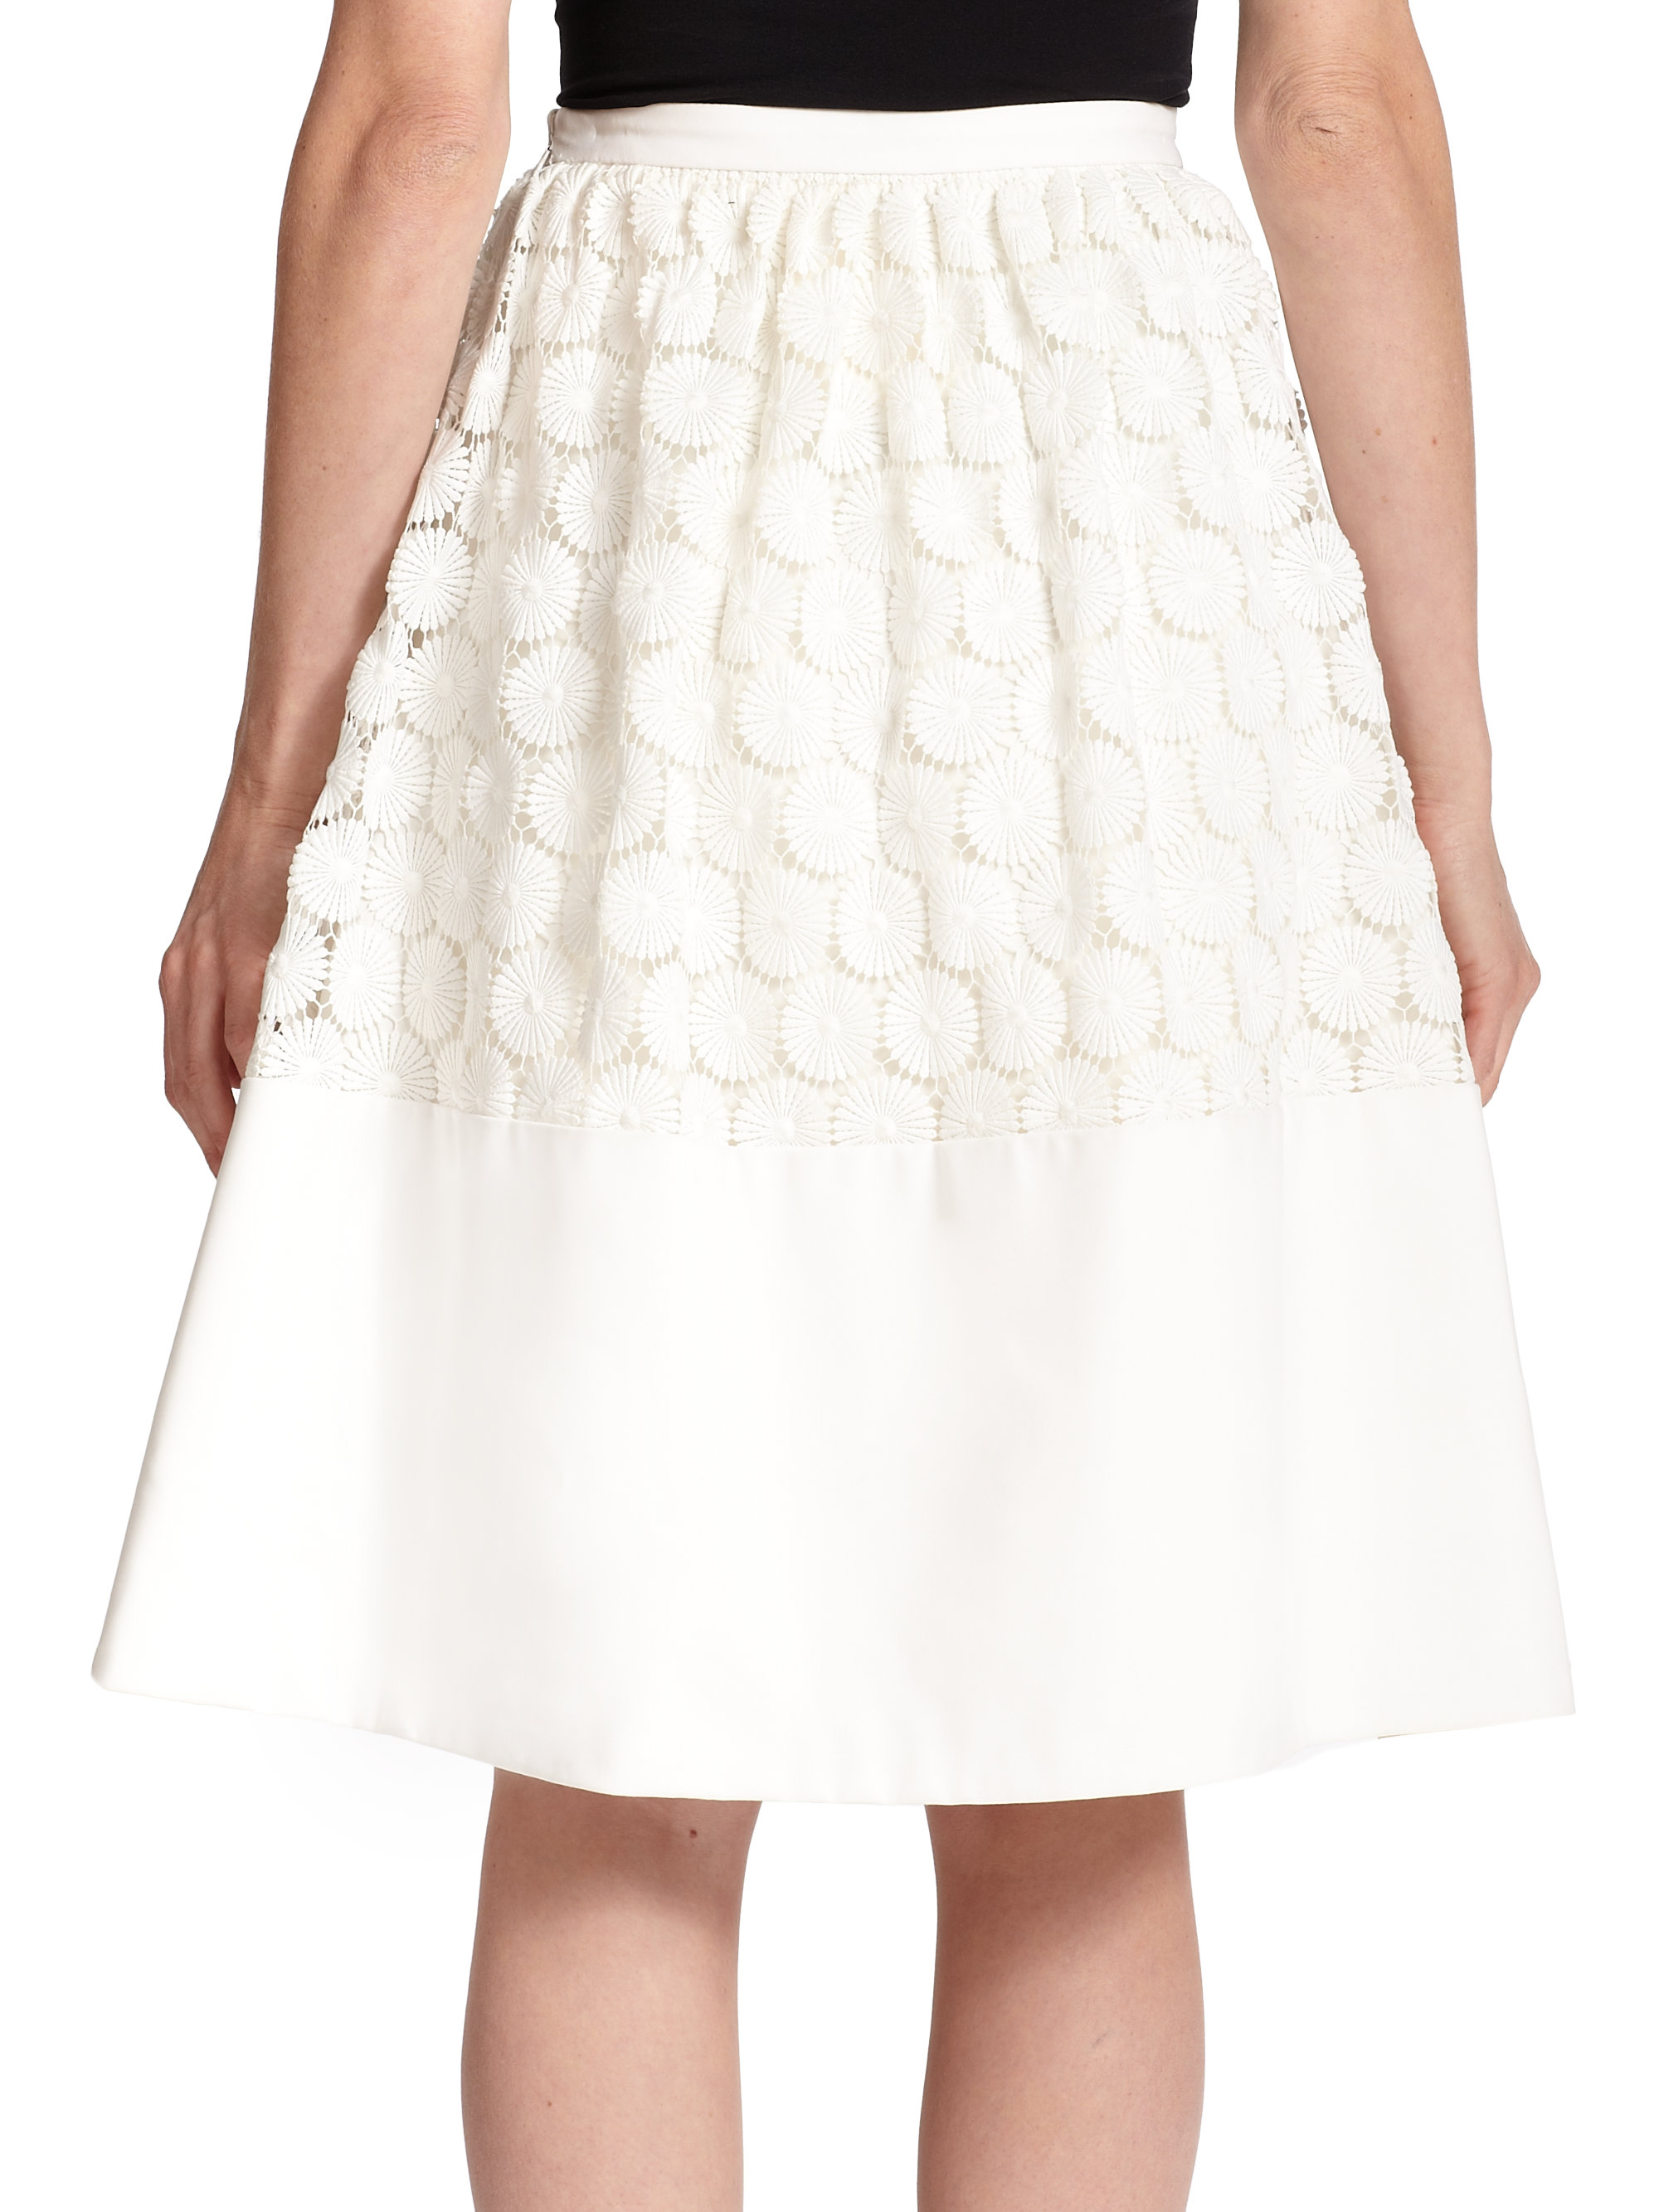 Lyst - Alexis Ace Floral-Embroidered Midi Skirt in White